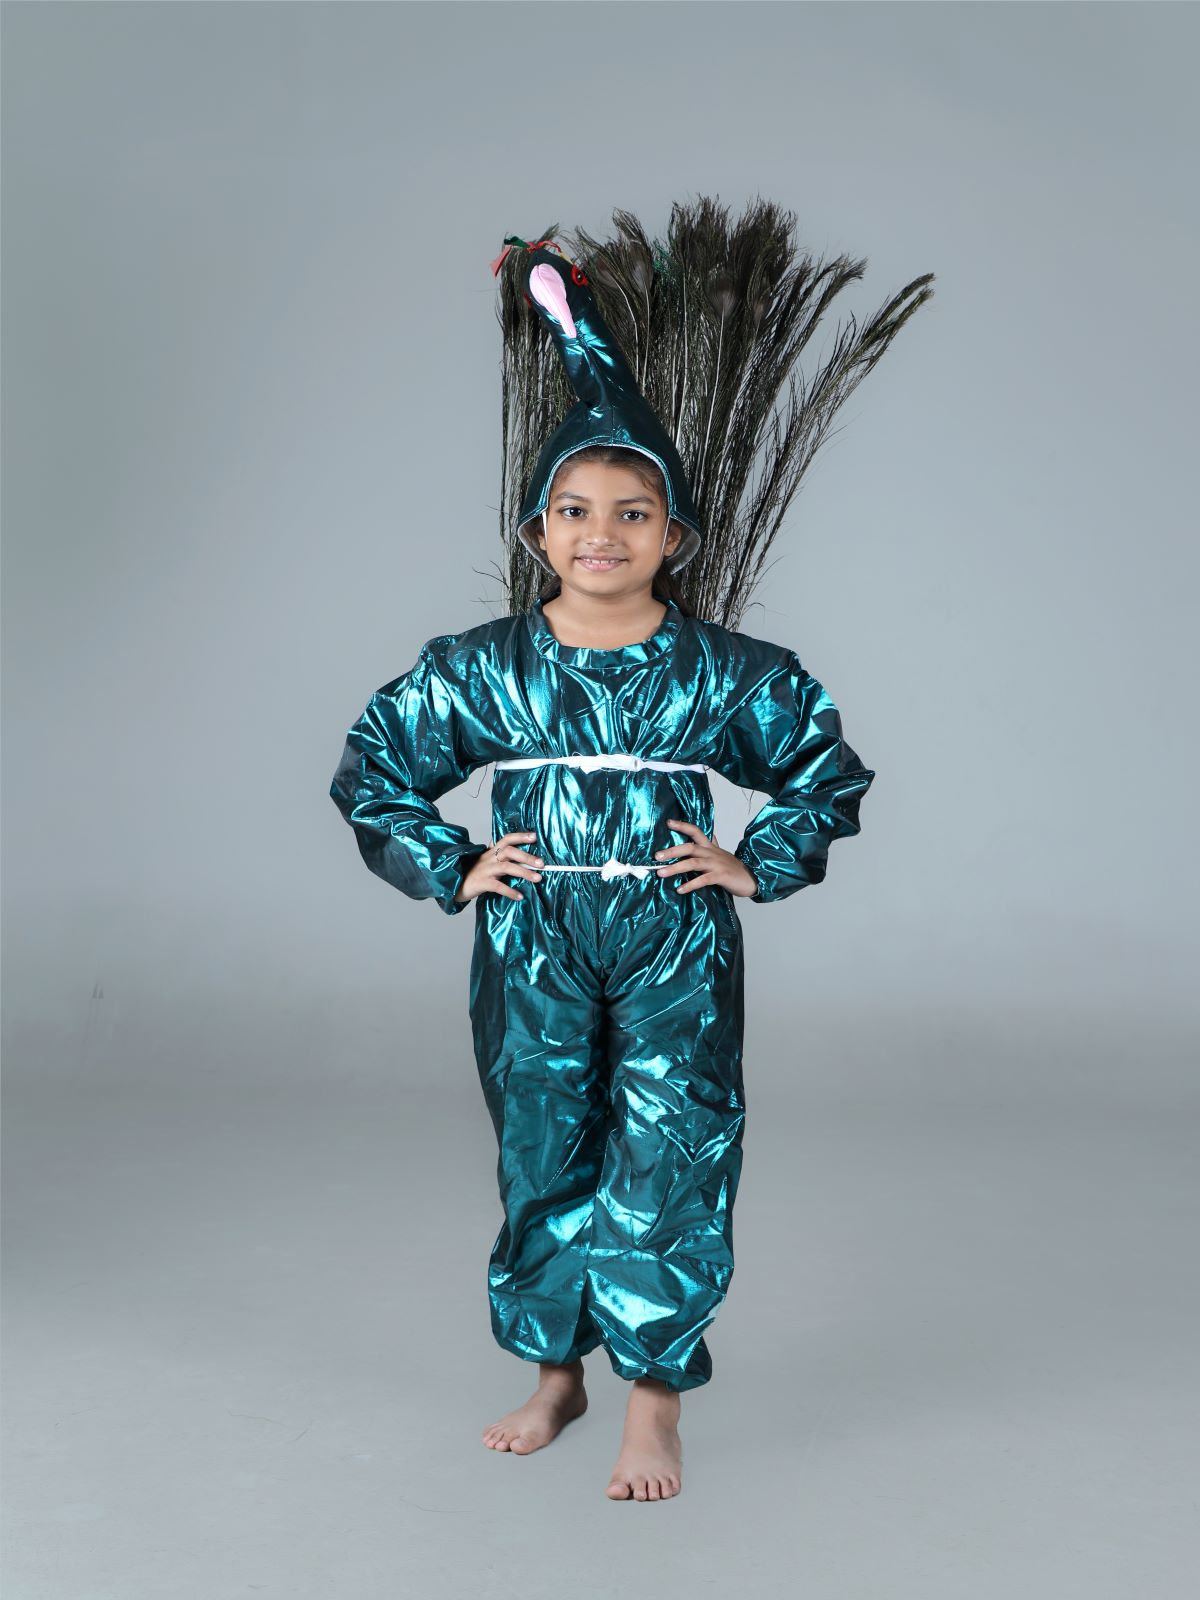 Mythology Fancy Dress Costume at Rs 300 | Fancy Costume in Greater Noida |  ID: 2851978490697